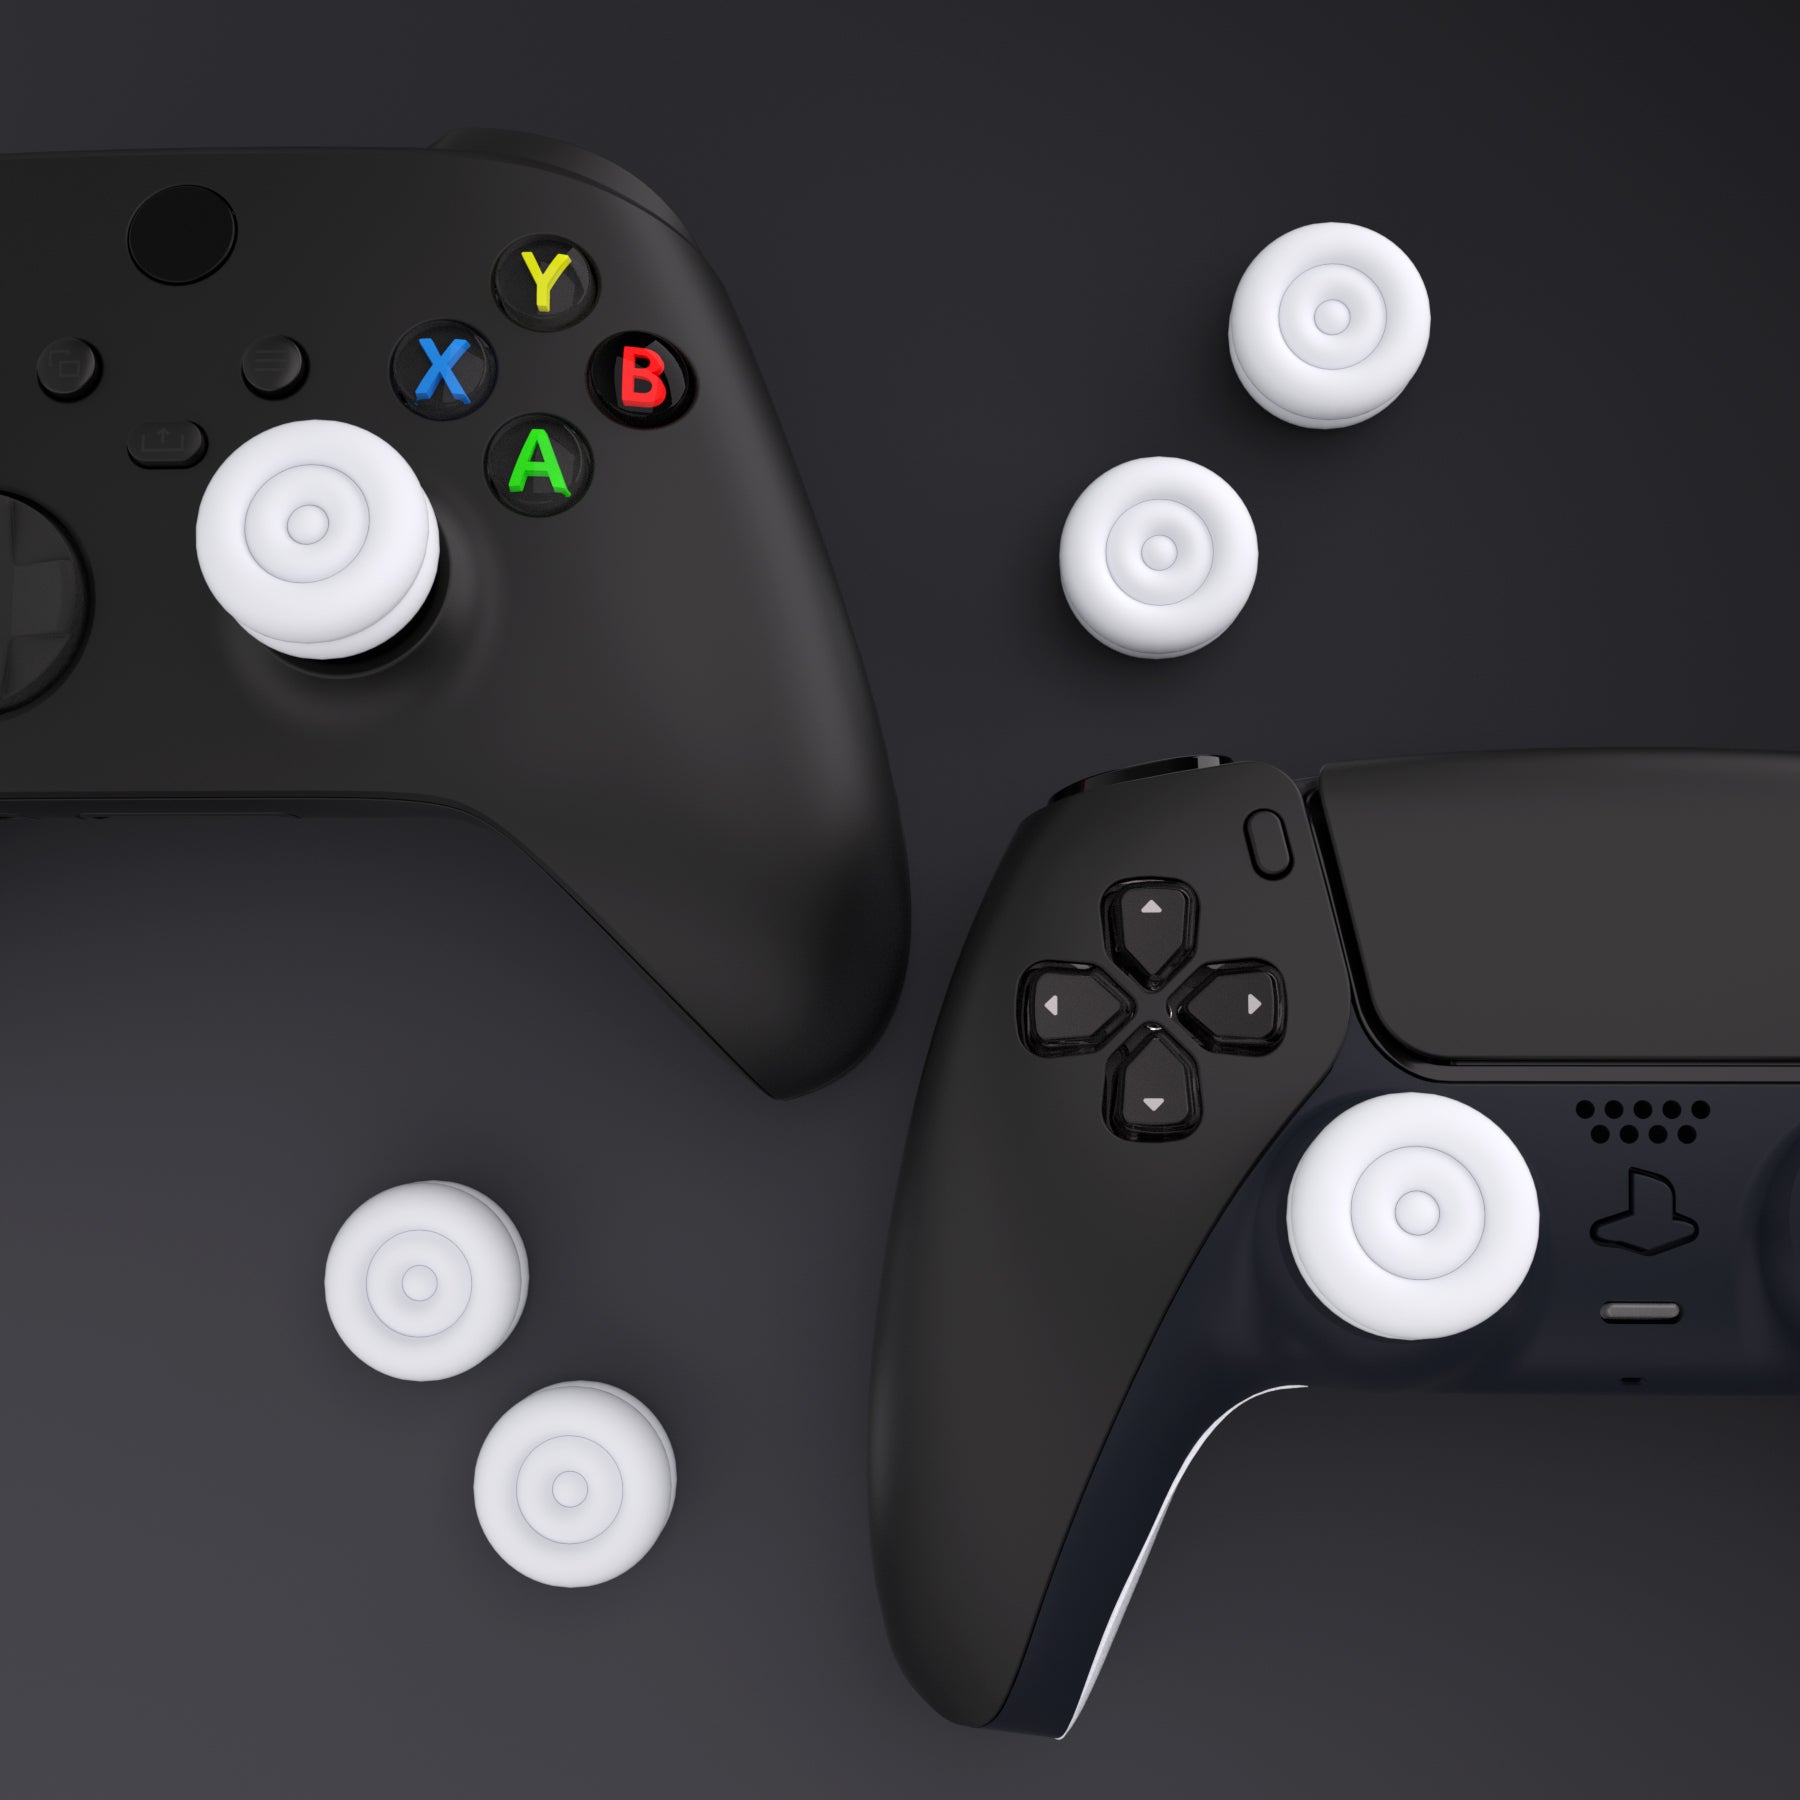 PlayVital Thumbs Cushion Caps Thumb Grips for ps5, for ps4, Thumbstick Grip Cover for Xbox Series X/S, Thumb Grip Caps for Xbox One, Elite Series 2, for Switch Pro Controller - White - PJM3022 PlayVital